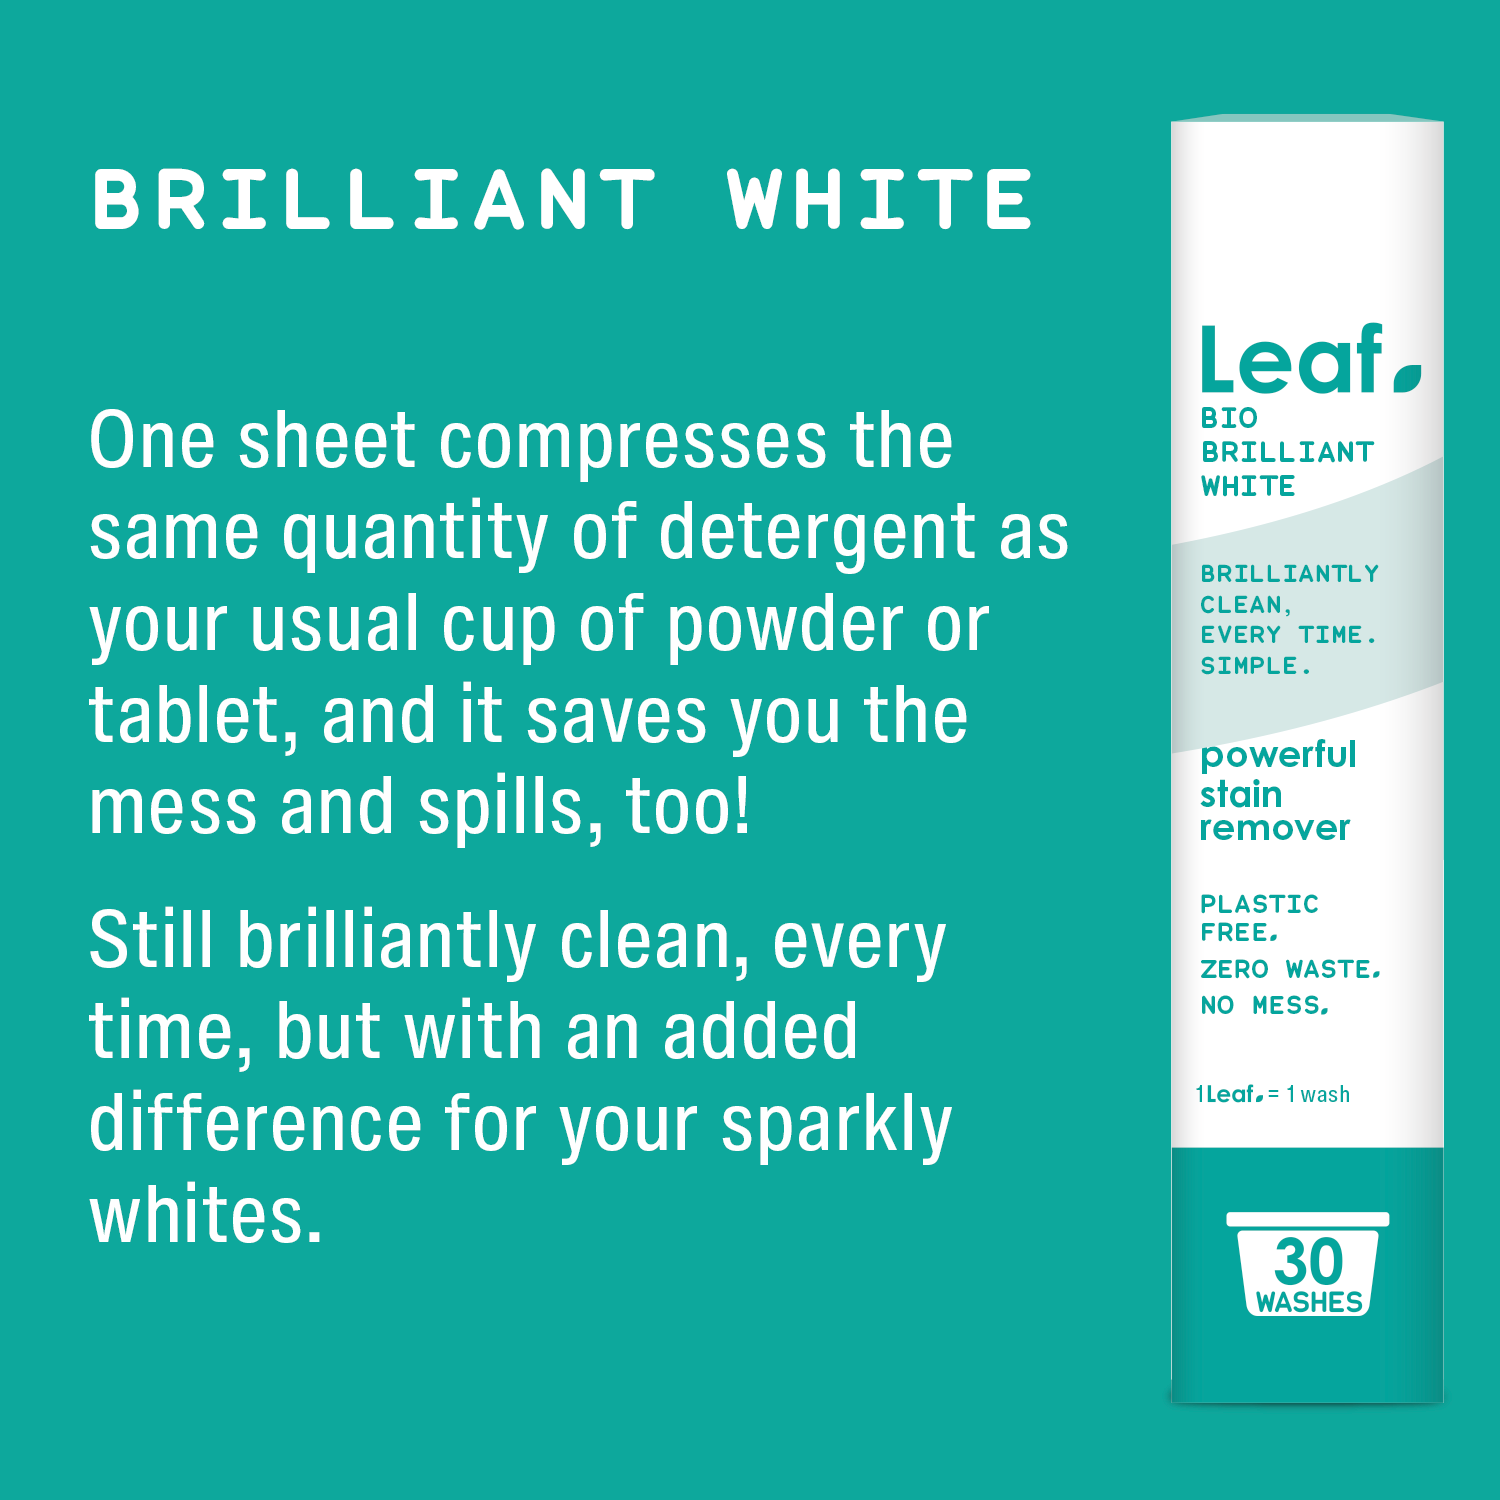 Leaf, bio brilliant white, one sheet equals a cup of powder or one laundry pod.